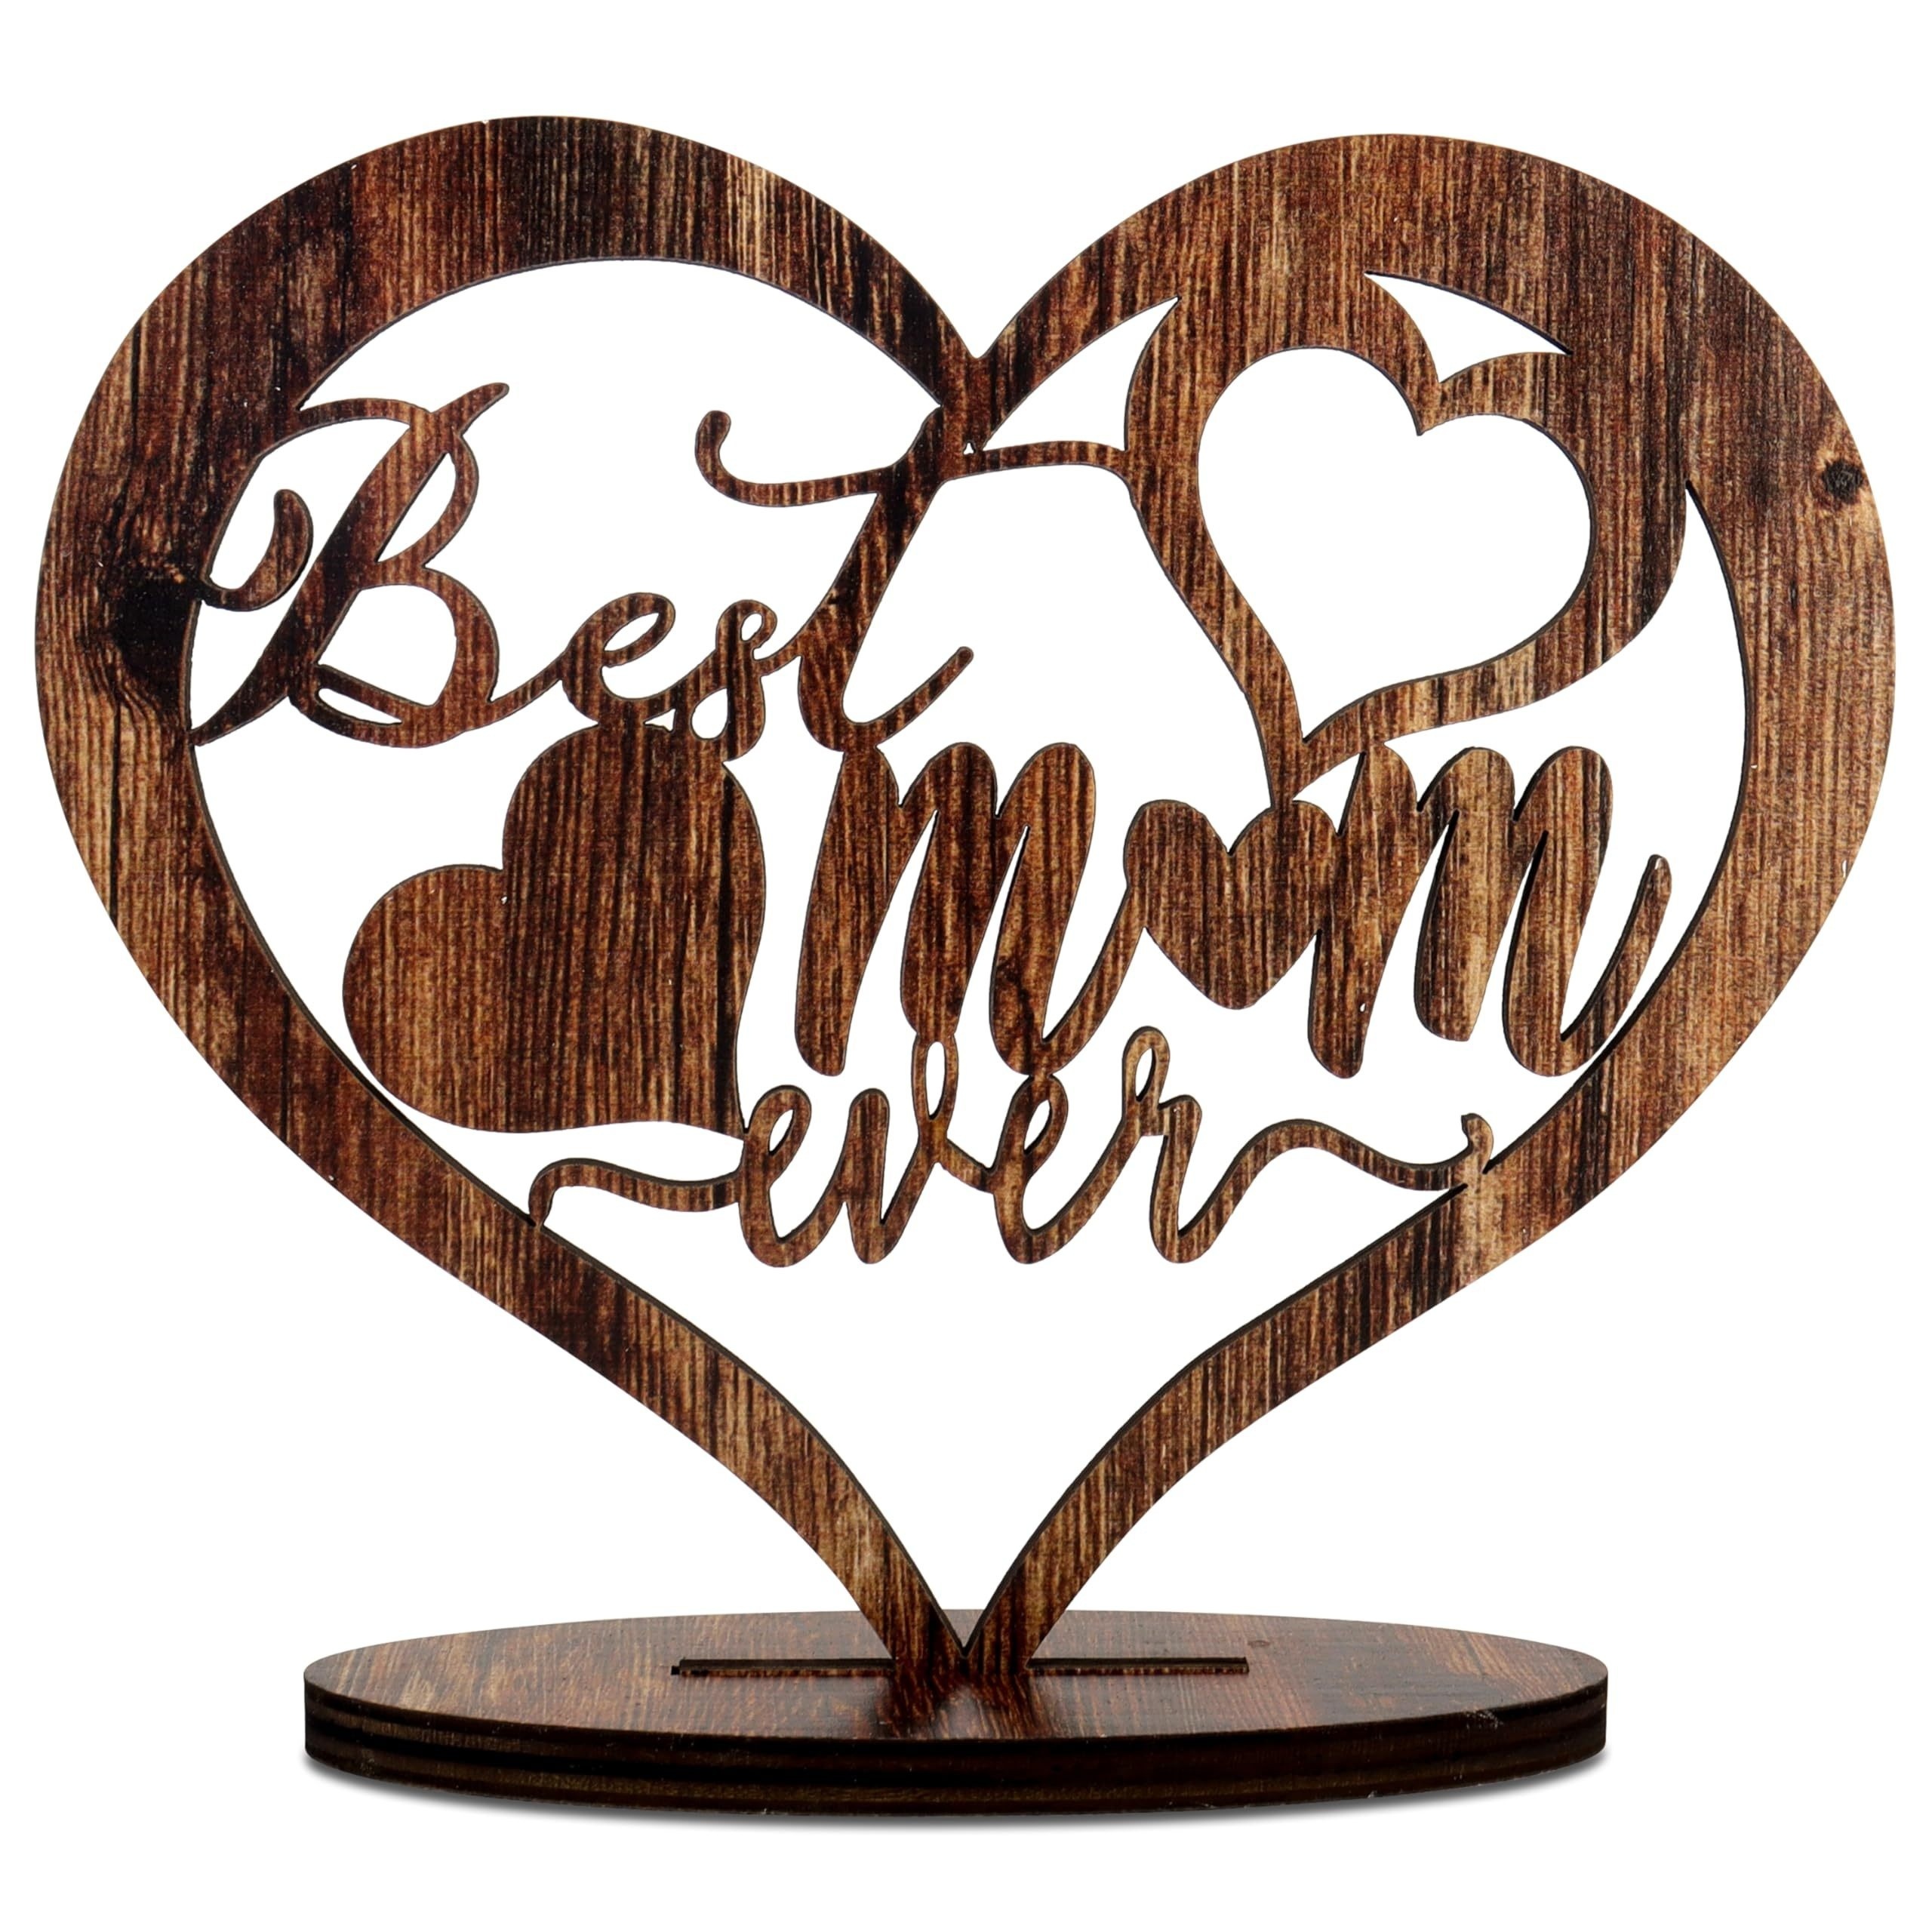 Gifts for Mom,Christmas Gifts for Mom from Daughter,Son-Best Mom